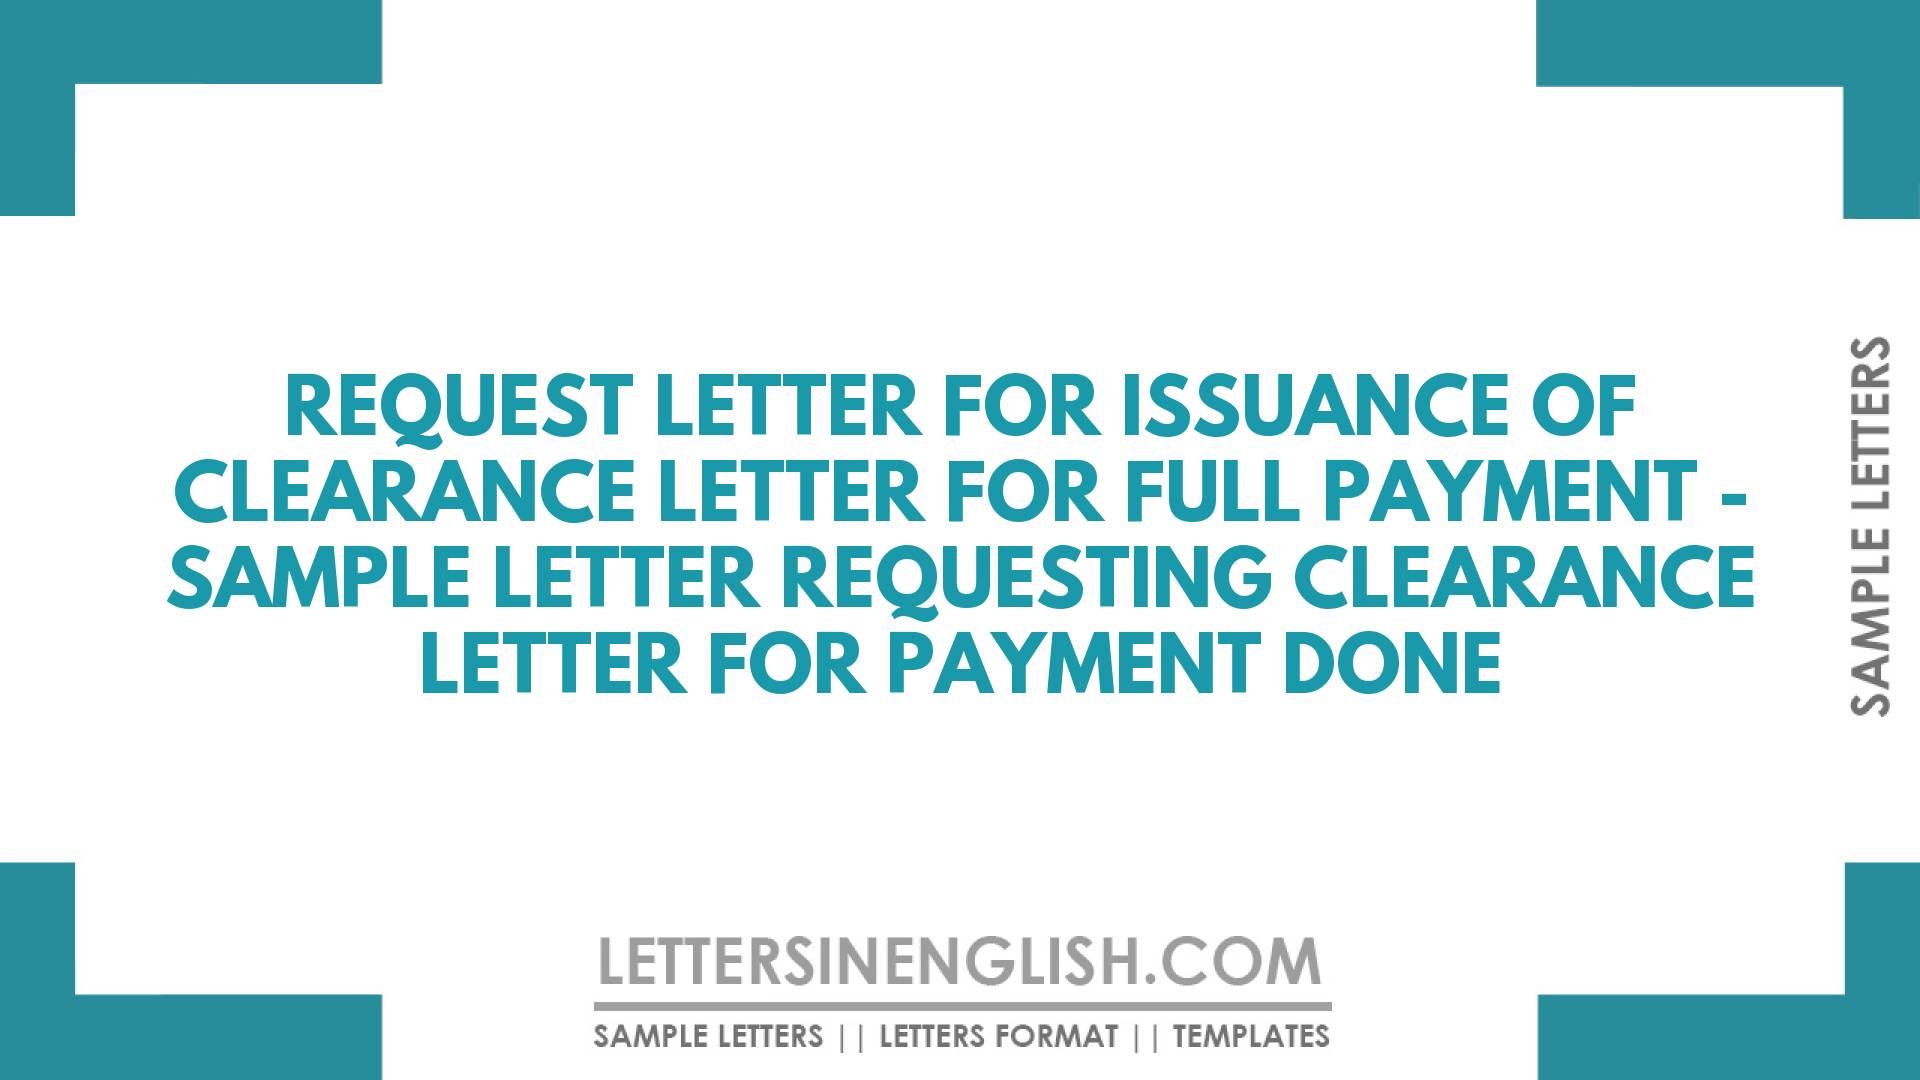 Request Letter for Issuance of Clearance Letter for Full Payment – Sample Letter Requesting Clearance Letter for Payment Done